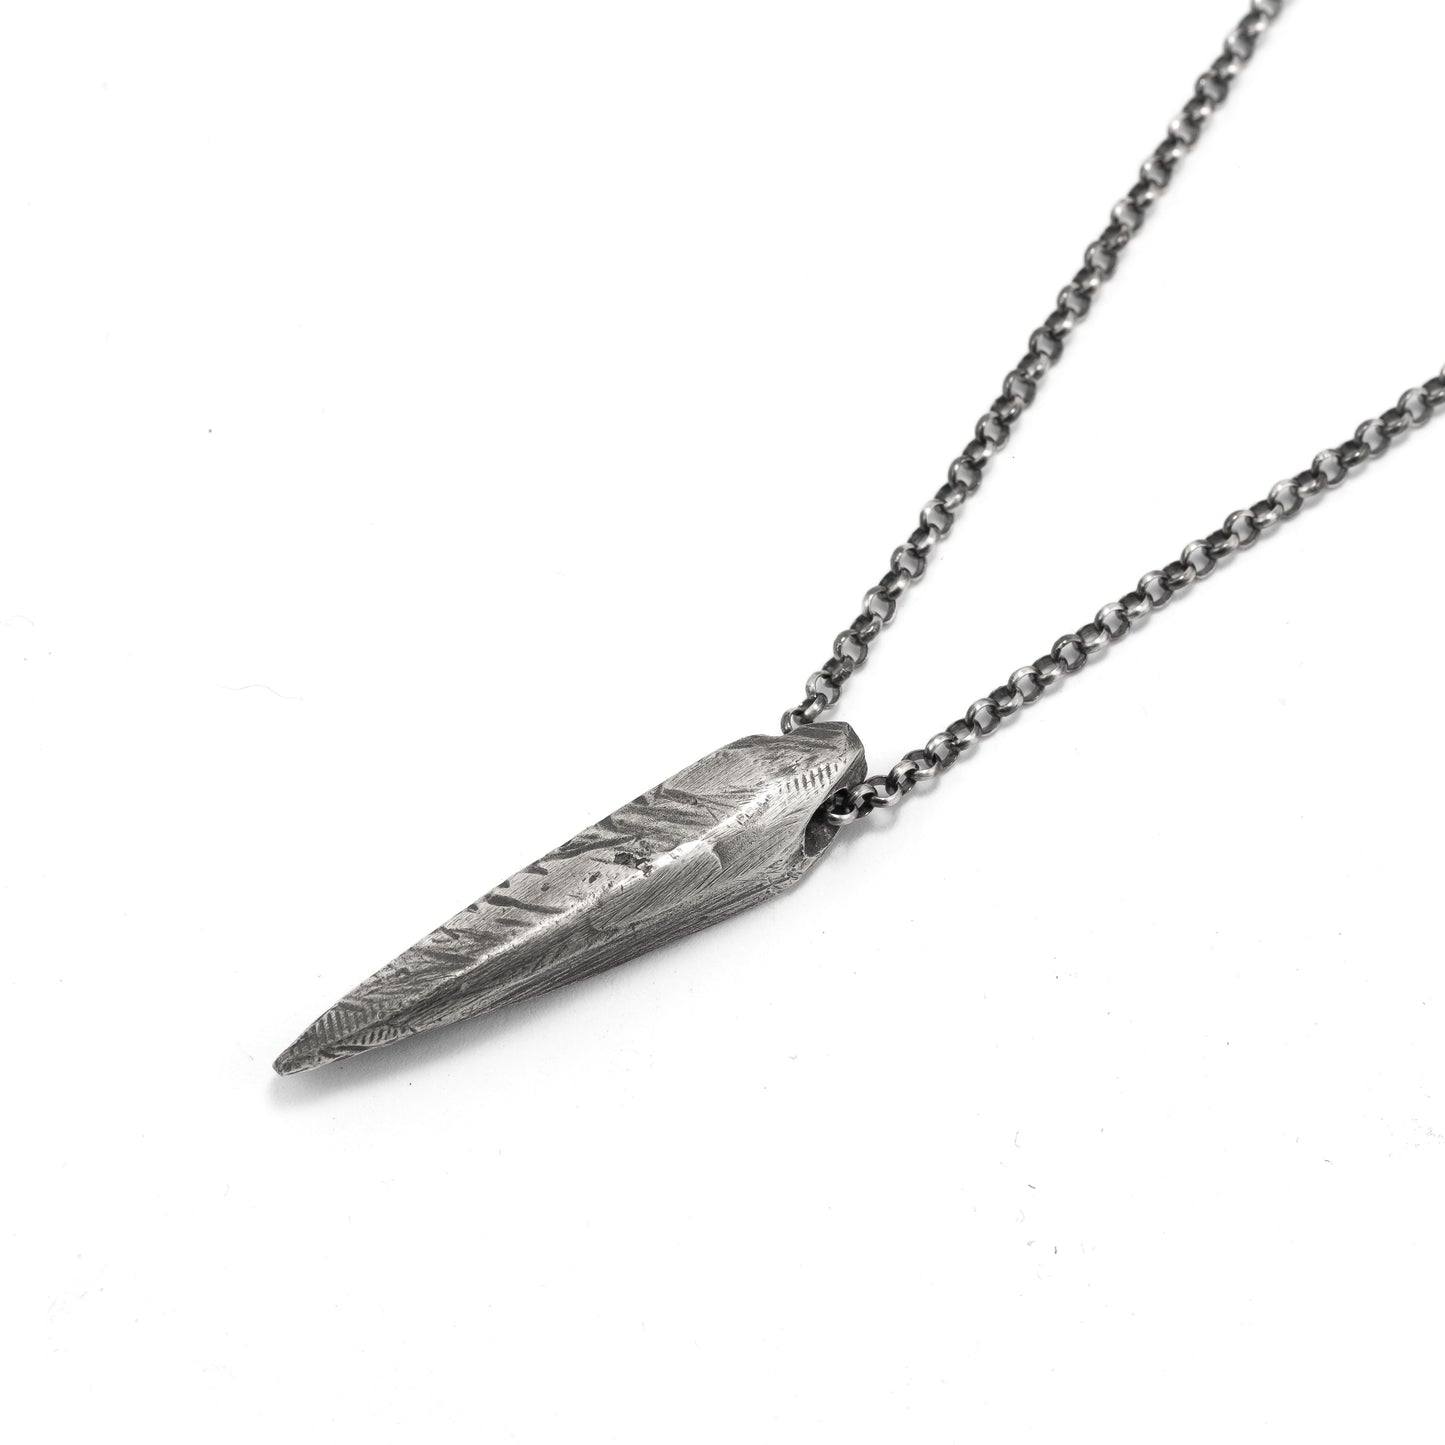 Spike silver necklace